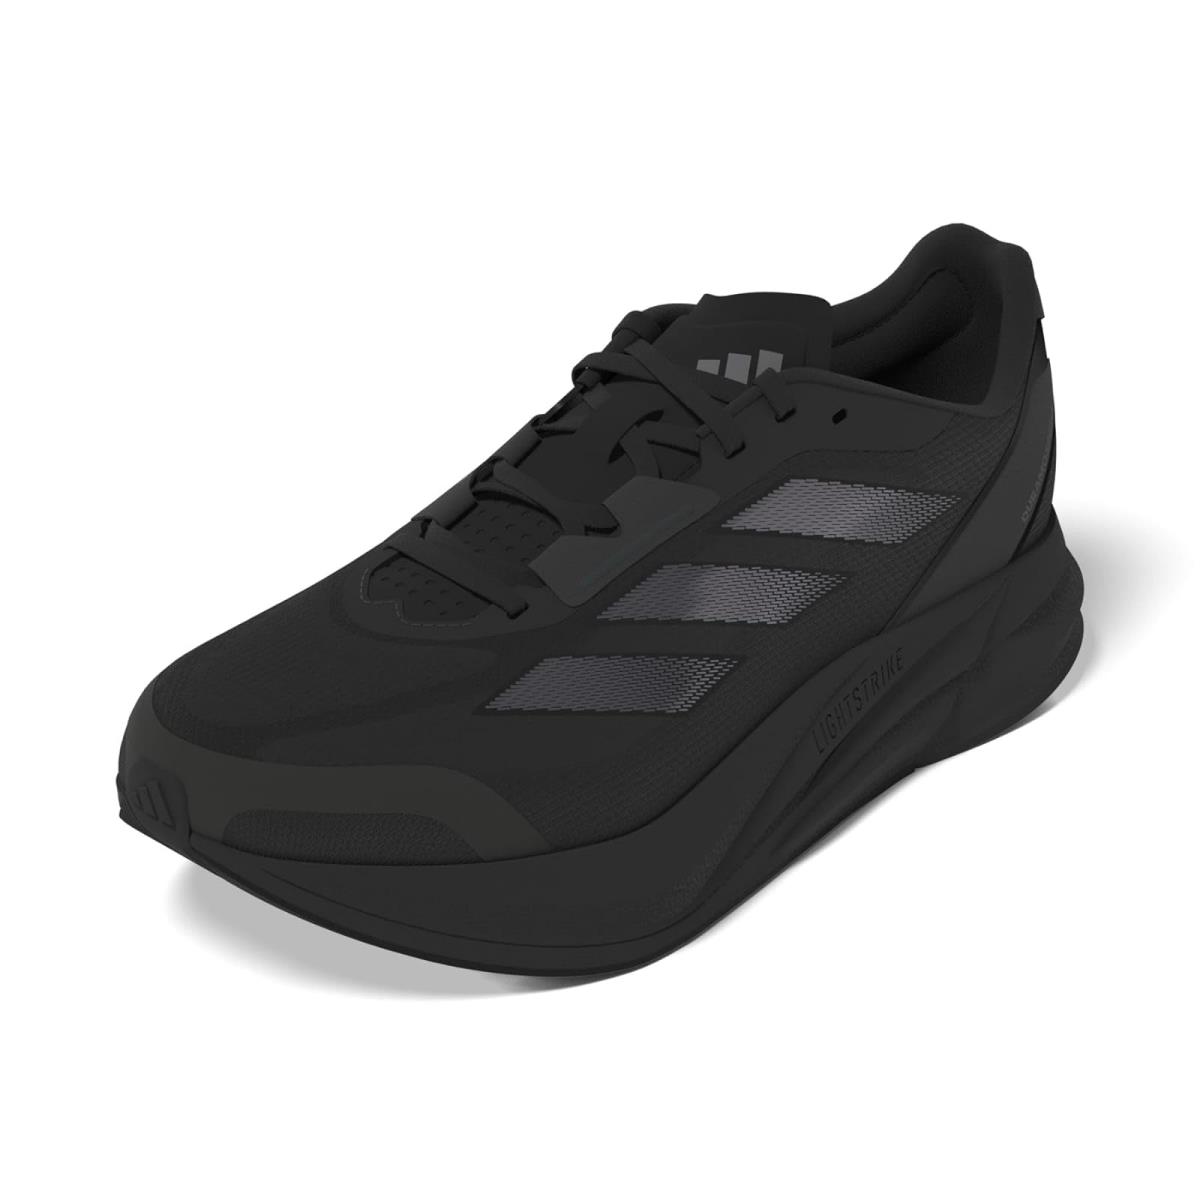 Woman`s Sneakers Athletic Shoes Adidas Running Duramo Speed Core Black/Carbon/Footwear White